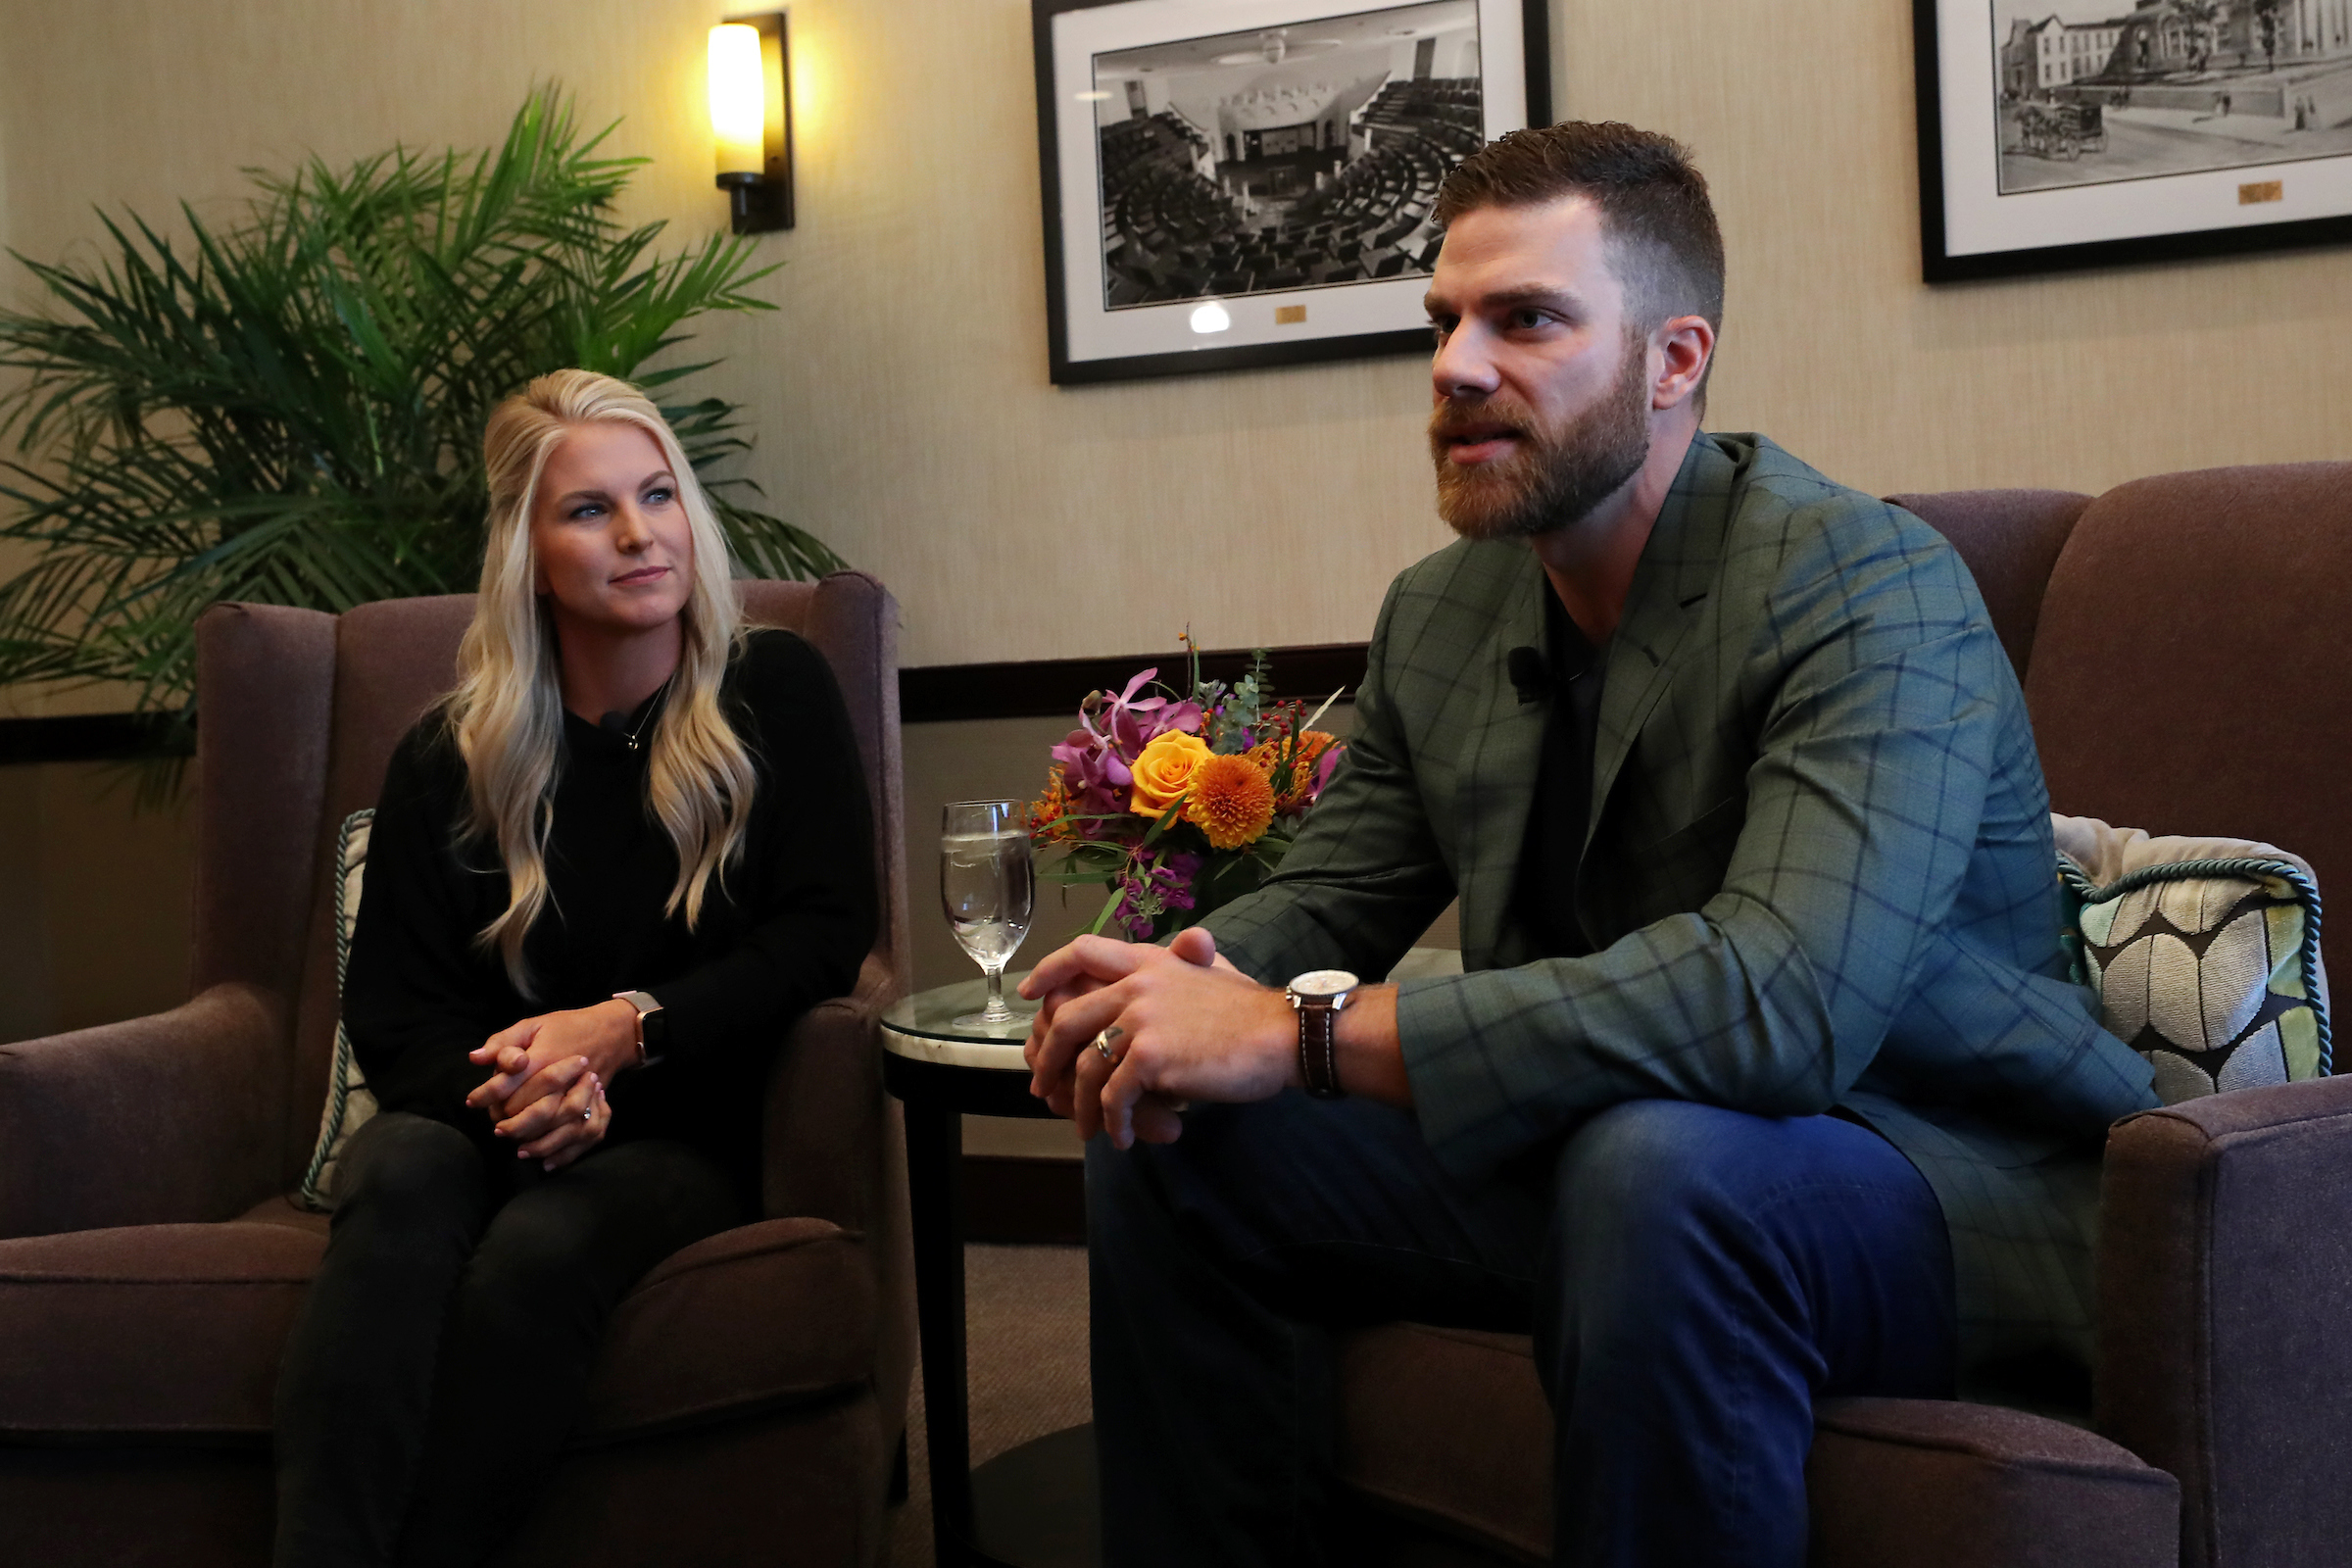 Chris Davis on $3 million donation: 'We want to do what we can to help  people out' 